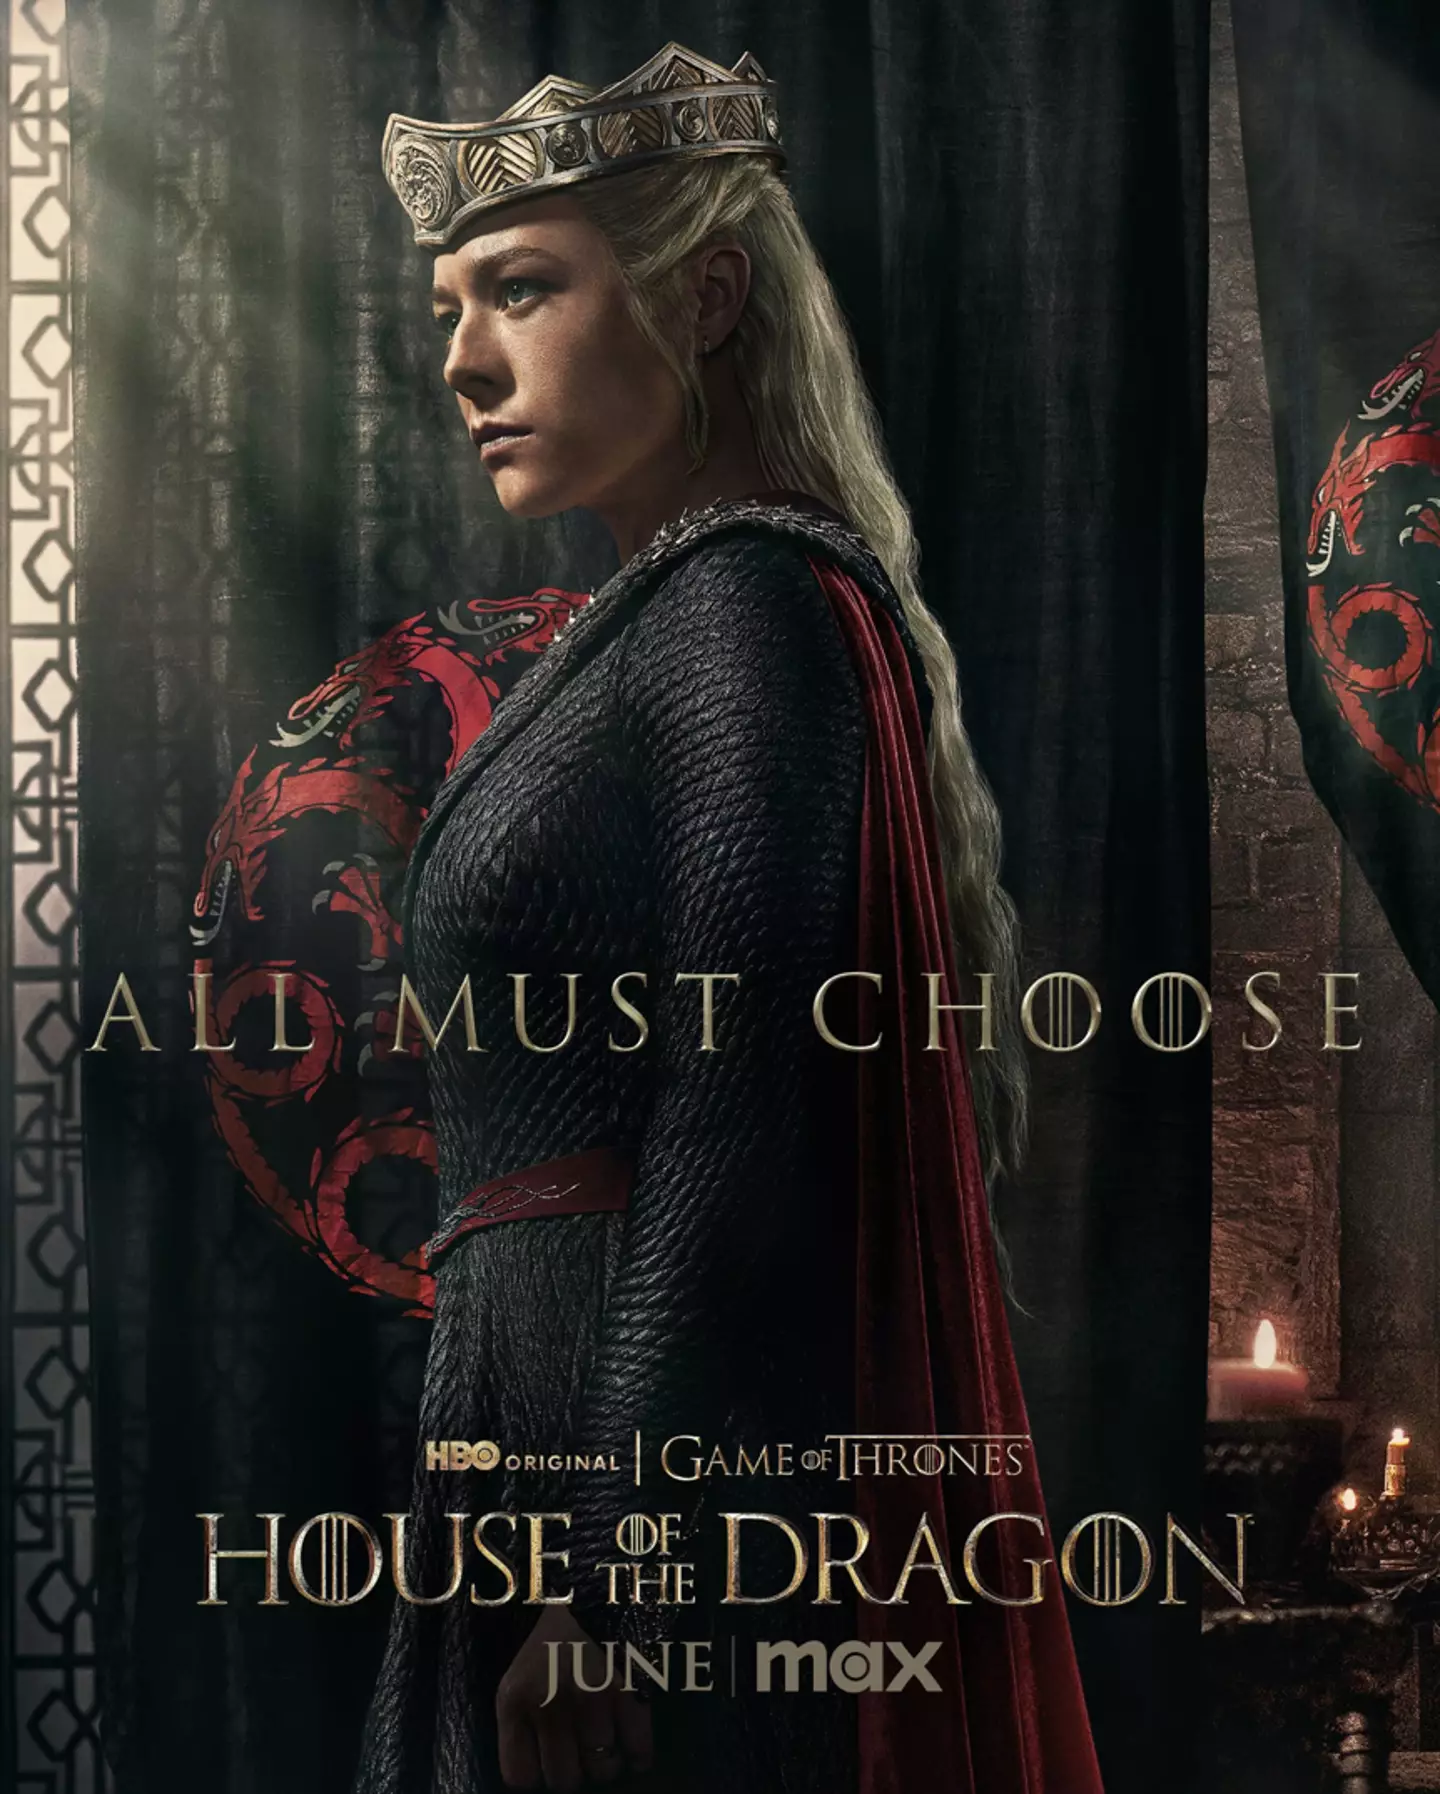 A new poster for season two asks audience members to choose a side.